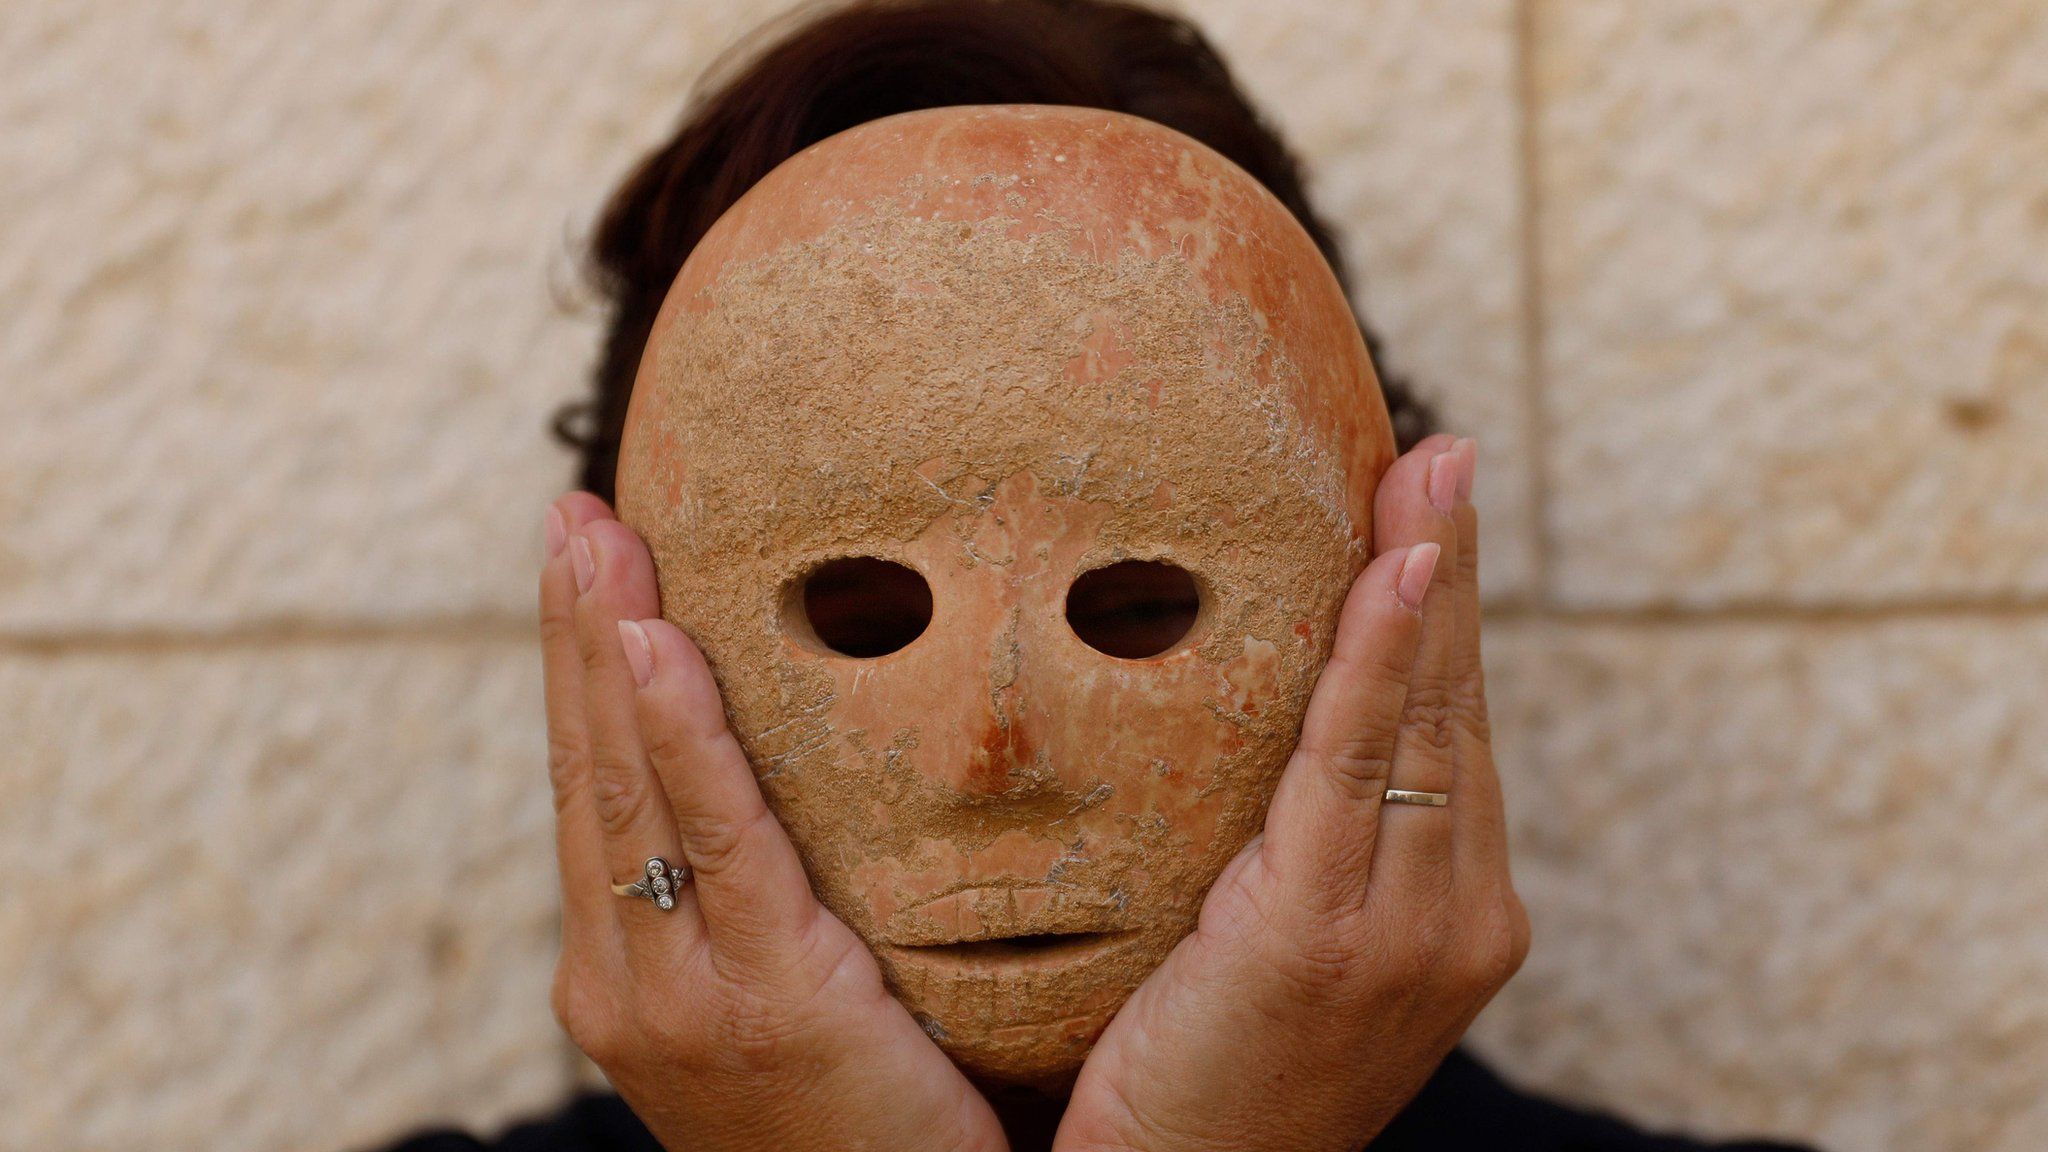 Mask found in the occupied West Bank